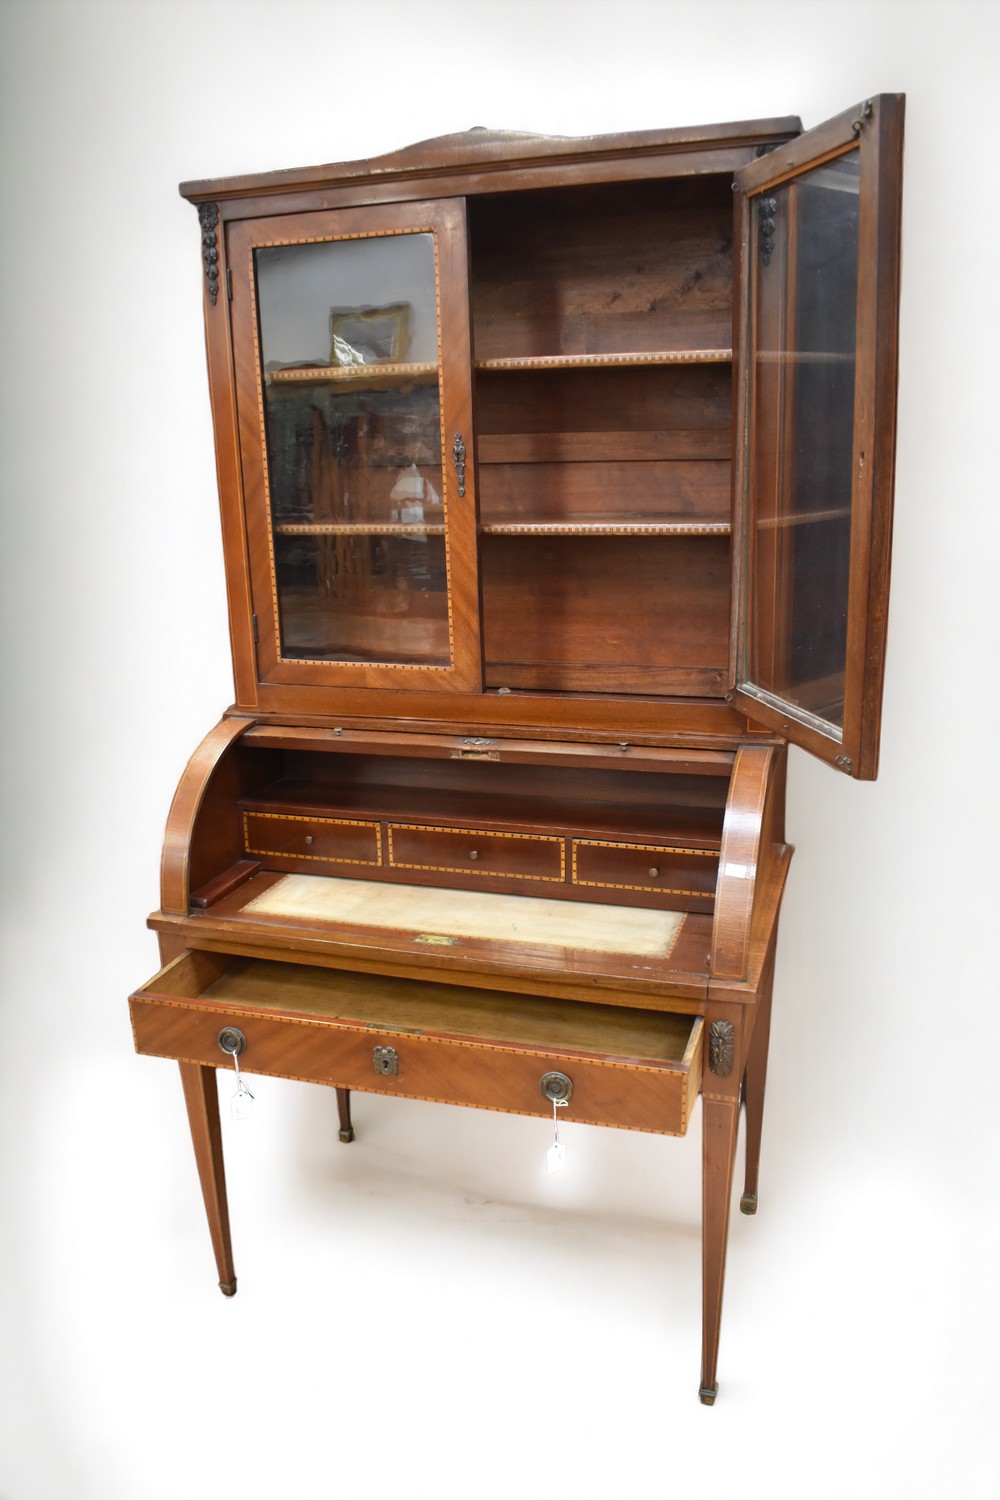 An Edwardian glazed writing bureau with cabinet top and inlaid design. - Image 2 of 2